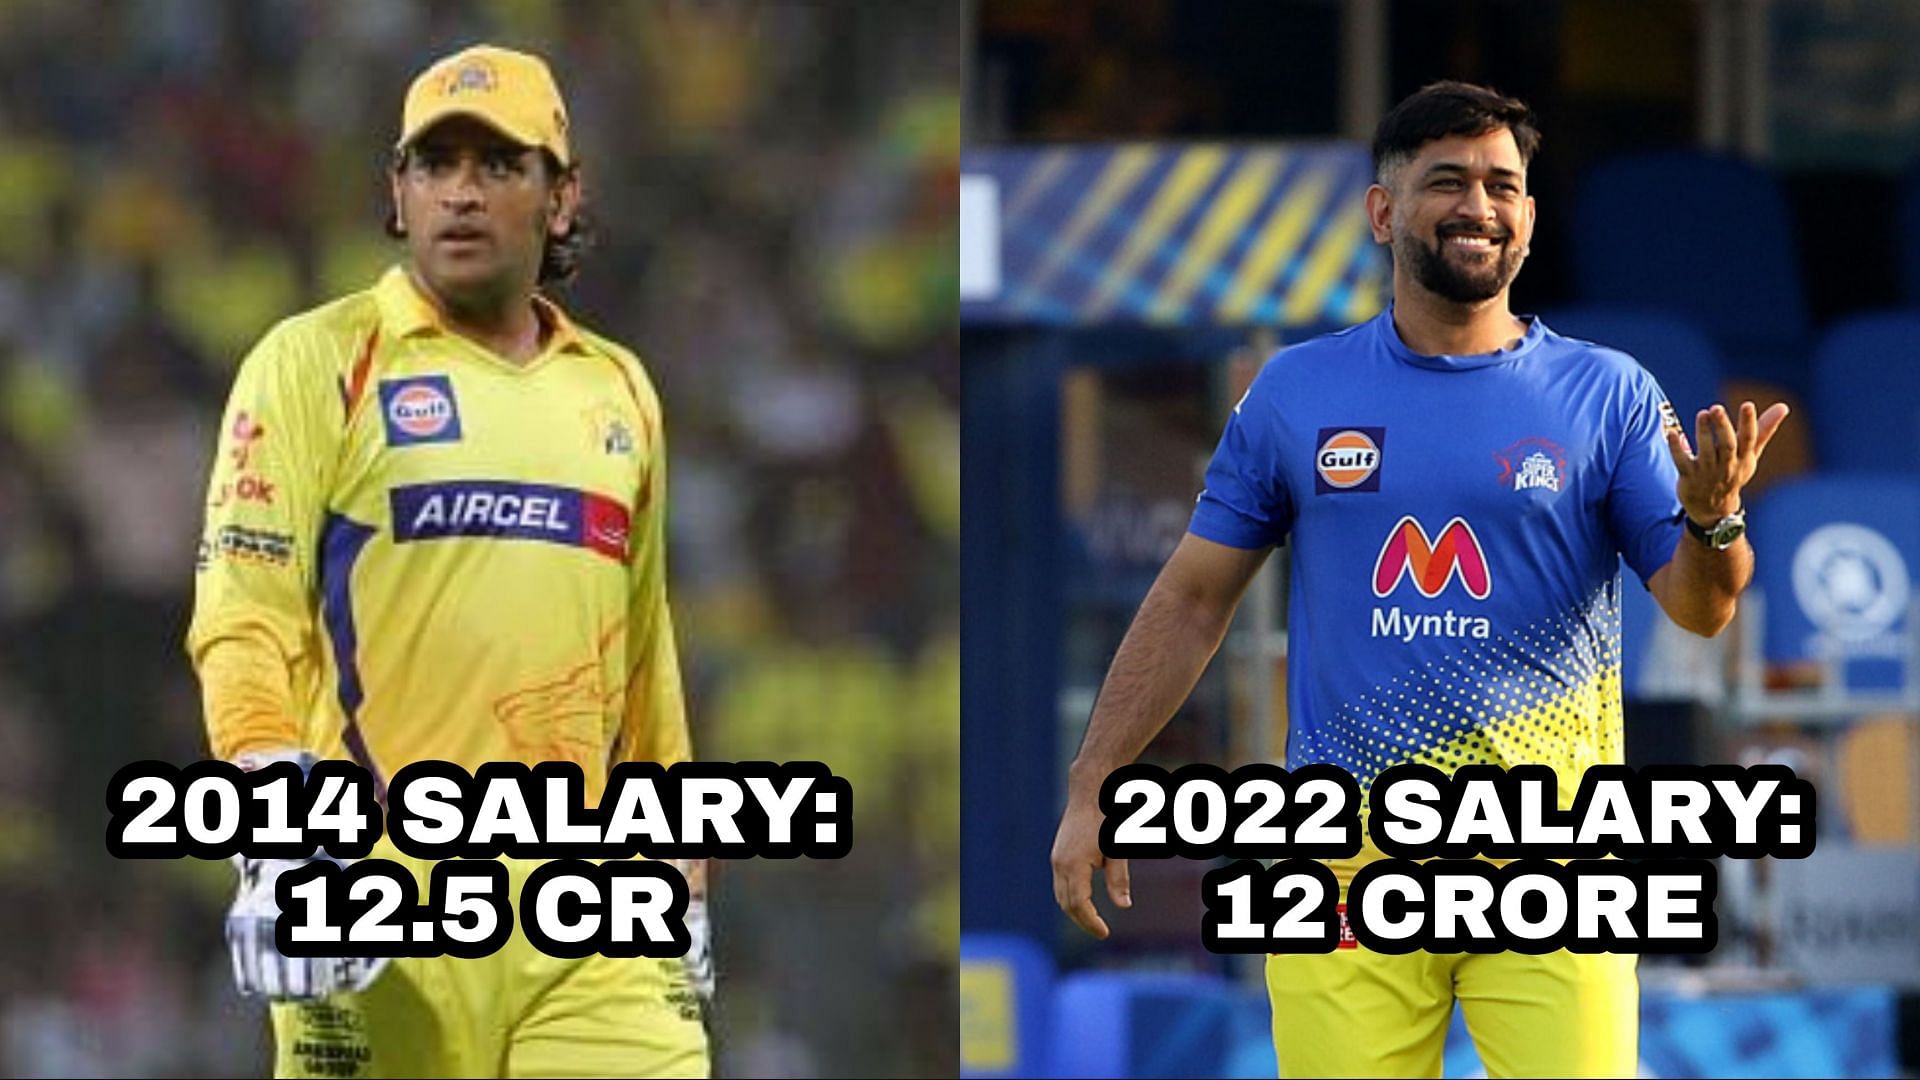 MS Dhoni was retained by CSK before IPL Auction 2014 and has been retained ahead of IPL Auction 2022